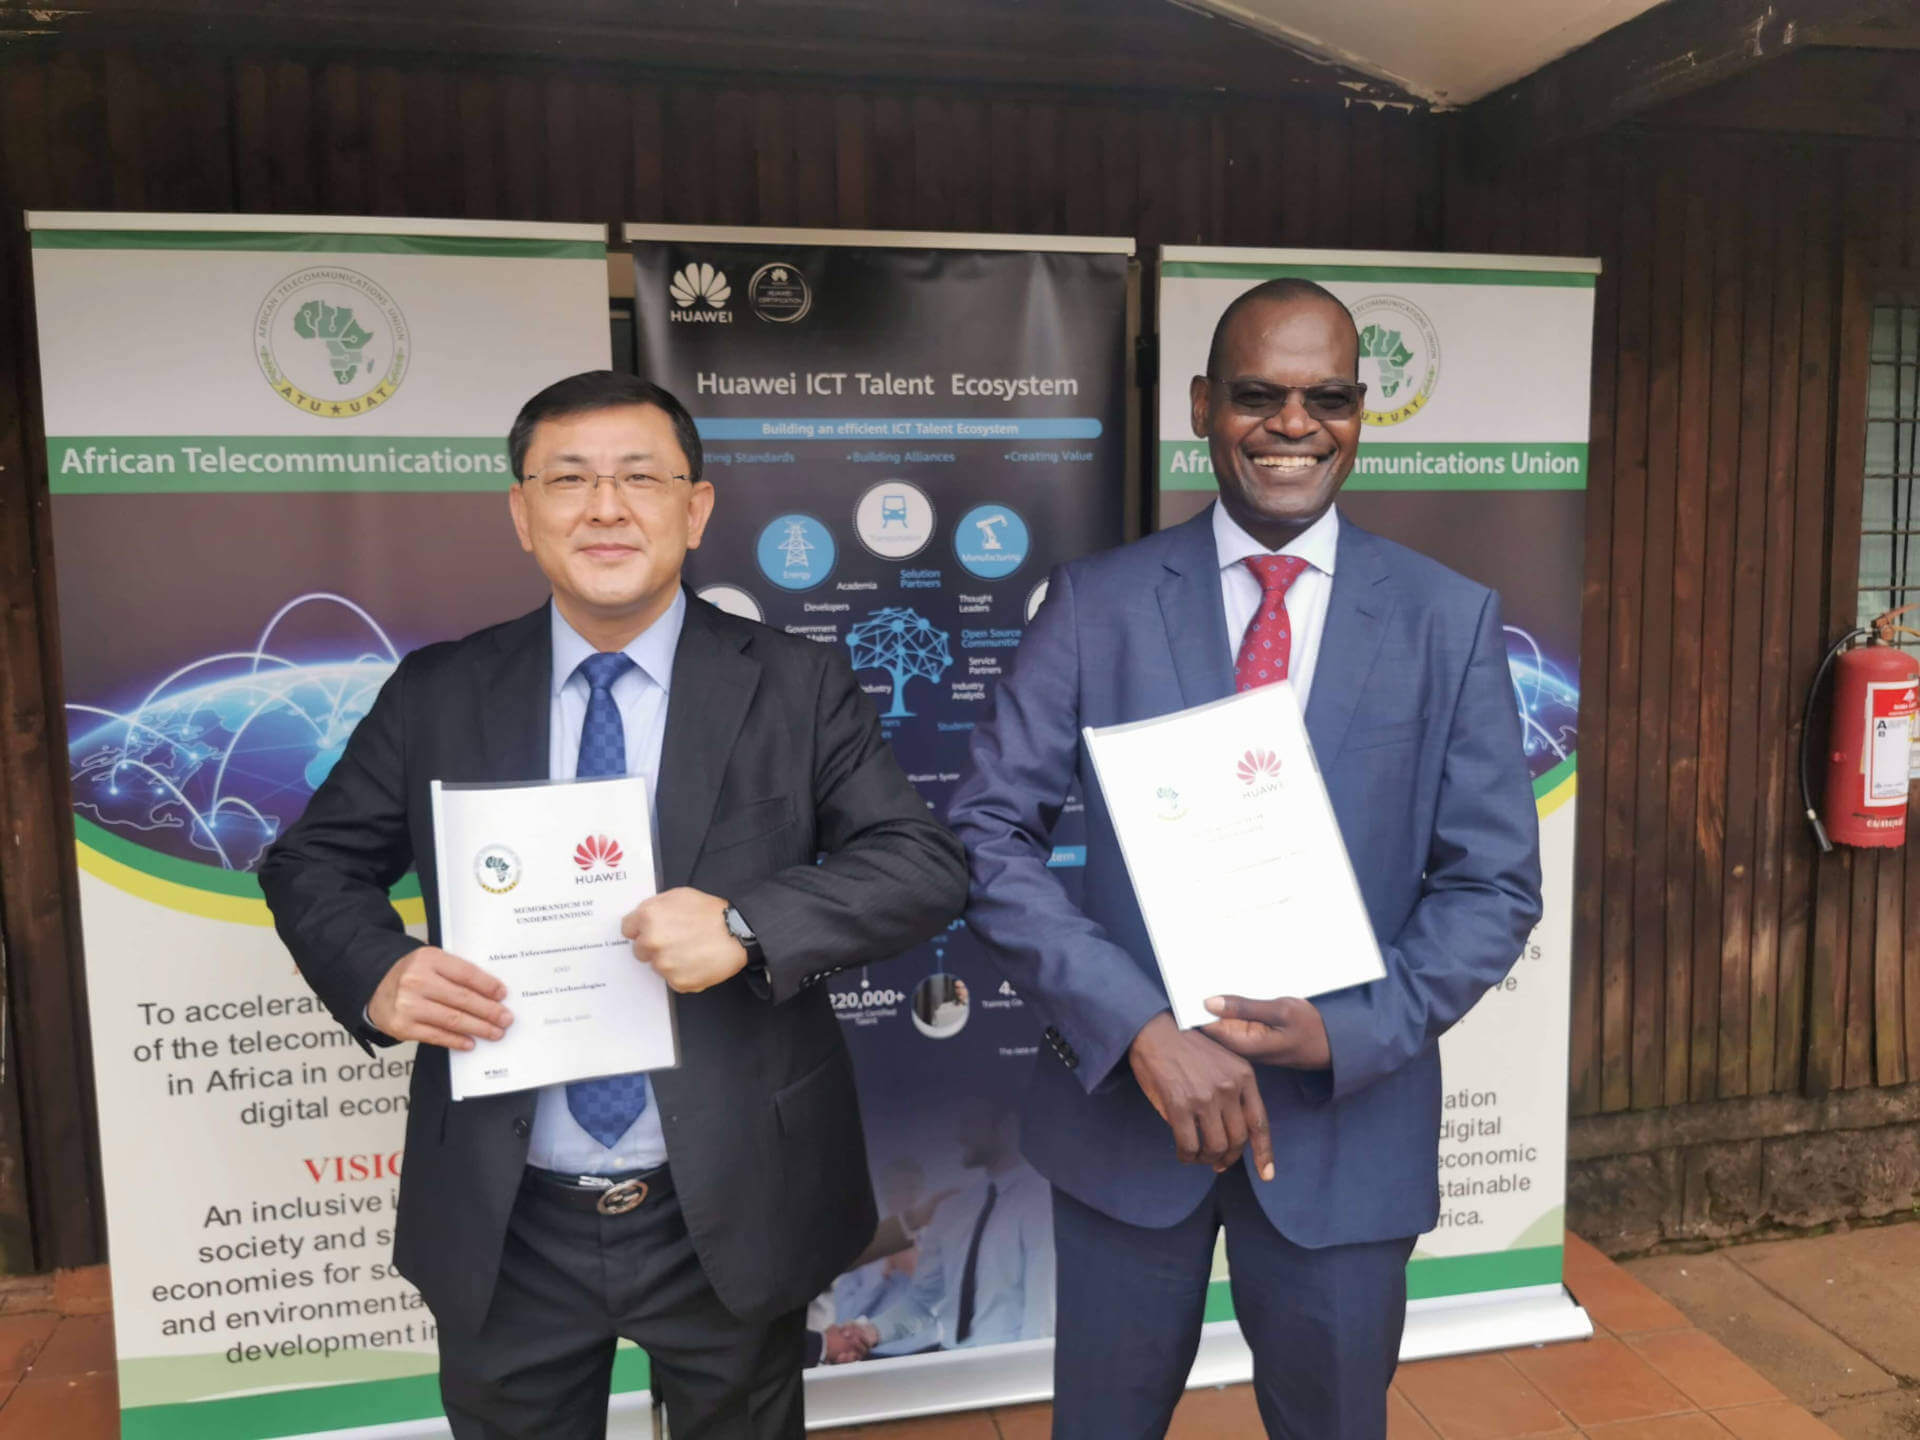 Huawei signs partnership deal with African Telecommunications Union